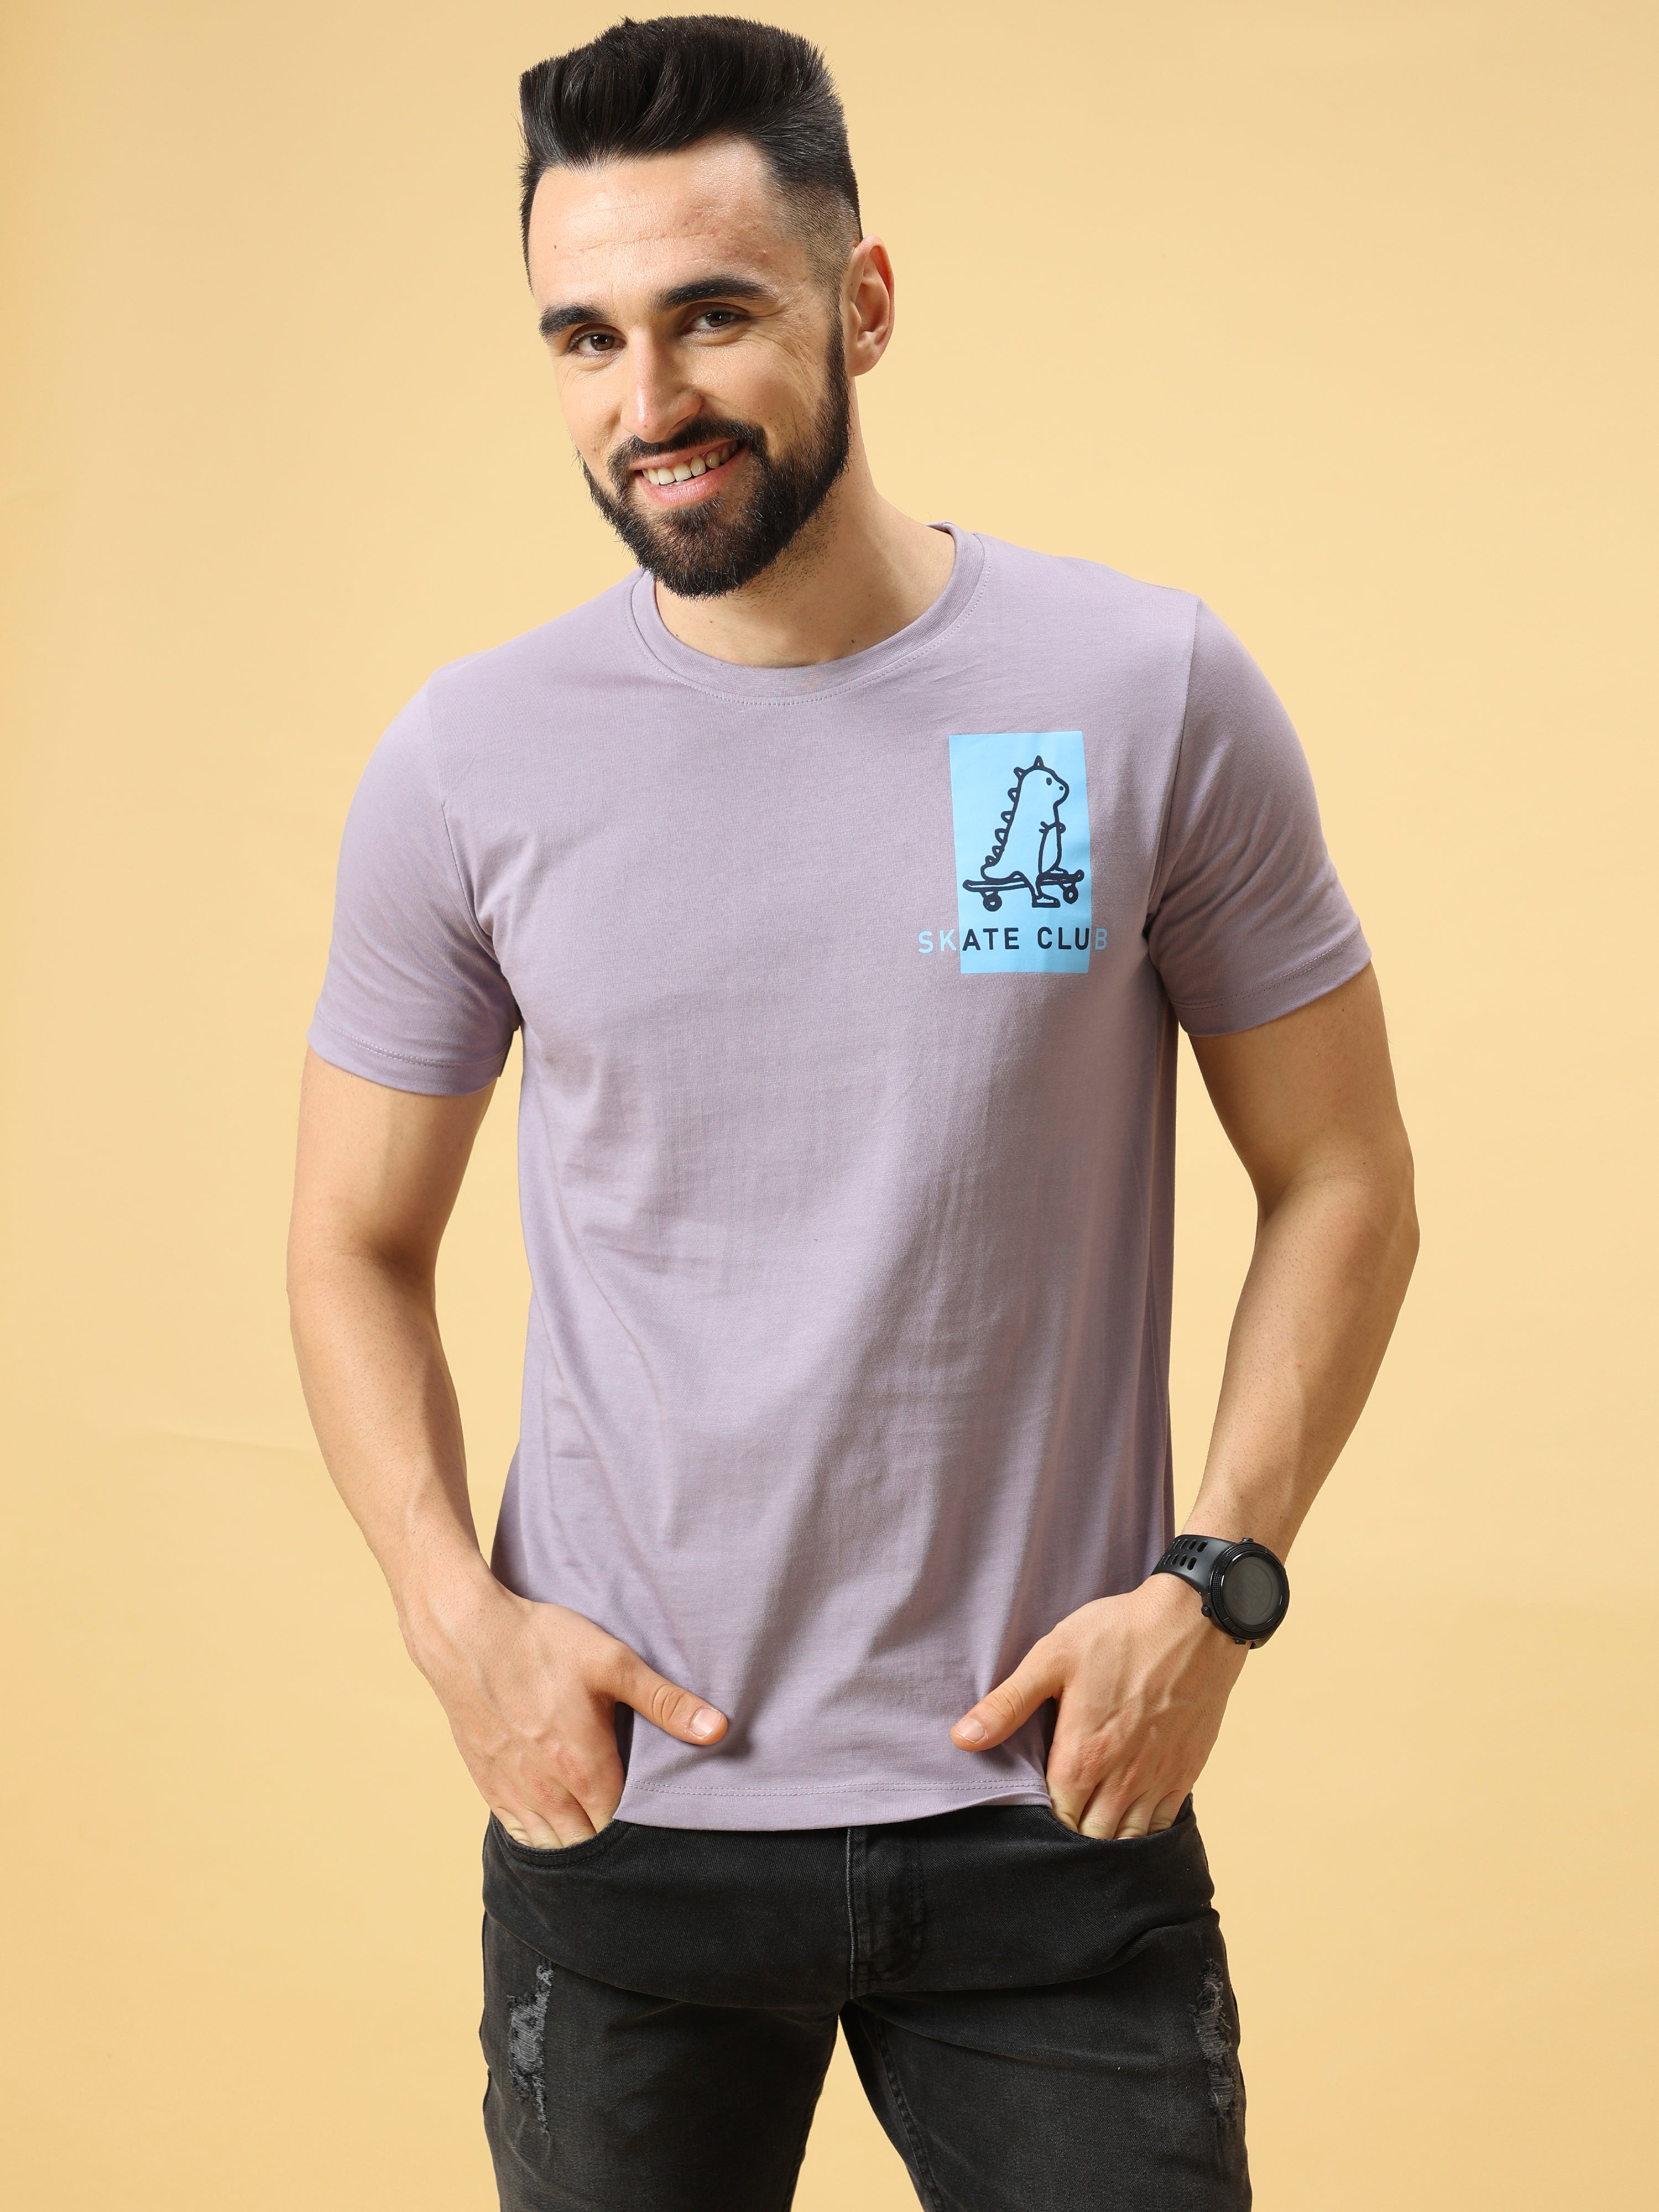 Skate Club Lt Blue Chest Print Crew Neck T-Shirt shop online at Estilocus. This pure cotton printed T-shirt is a stylish go-to for laidback days. Cut in a comfy regular fit. • 100% Cotton knitted interlock 190GSM• Bio washed fabric• Round neck T-shirt • H